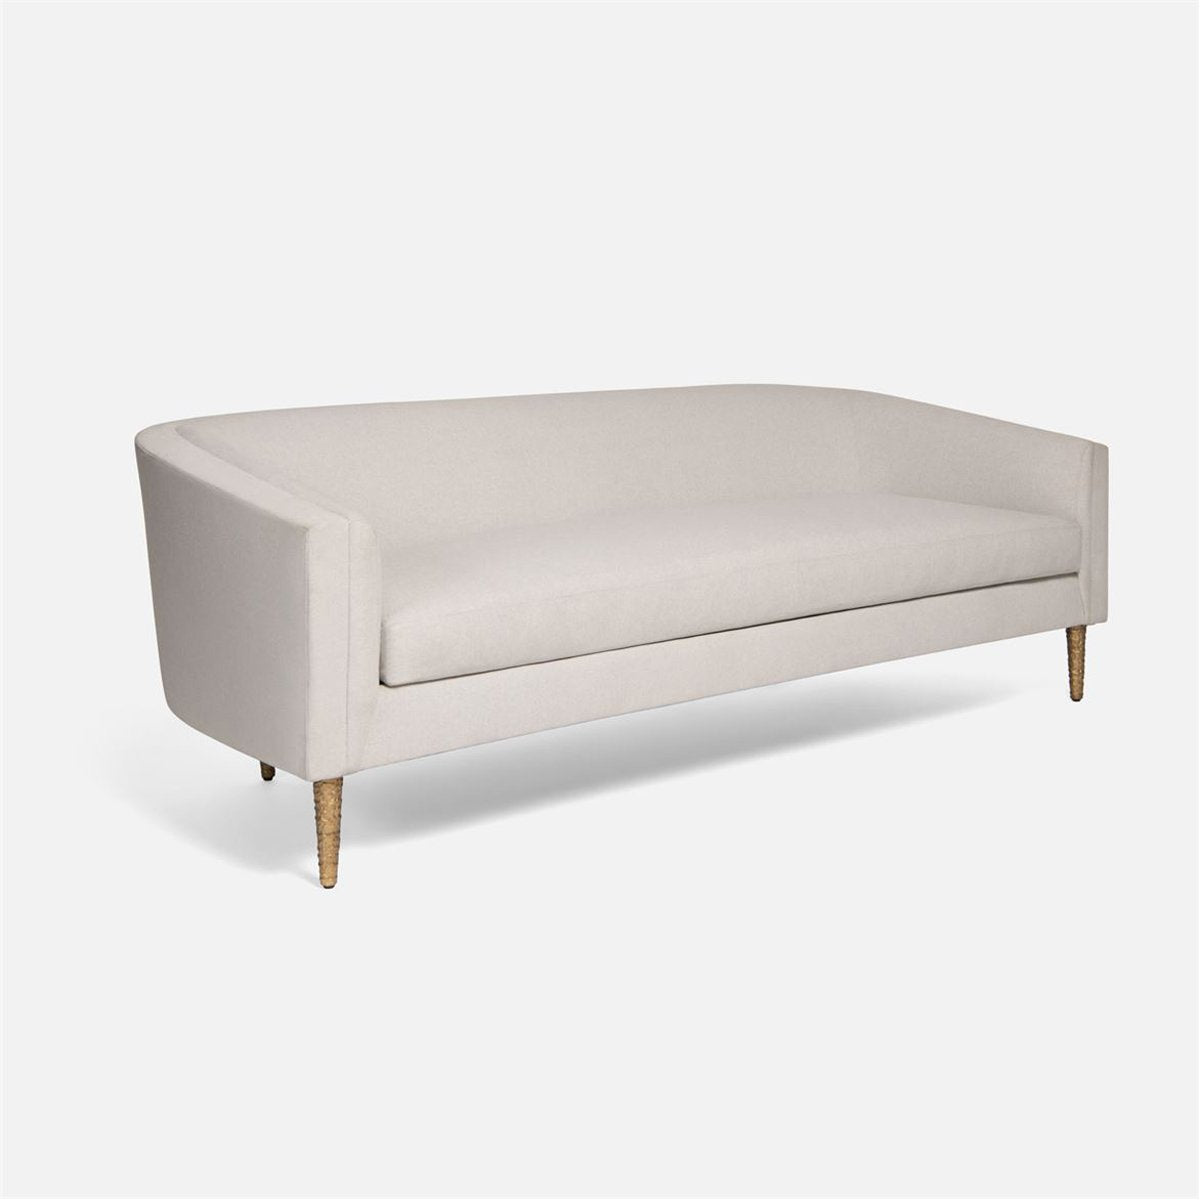 Made Goods Theron Upholstered Curved Back Sofa in Liard Cotton Velvet